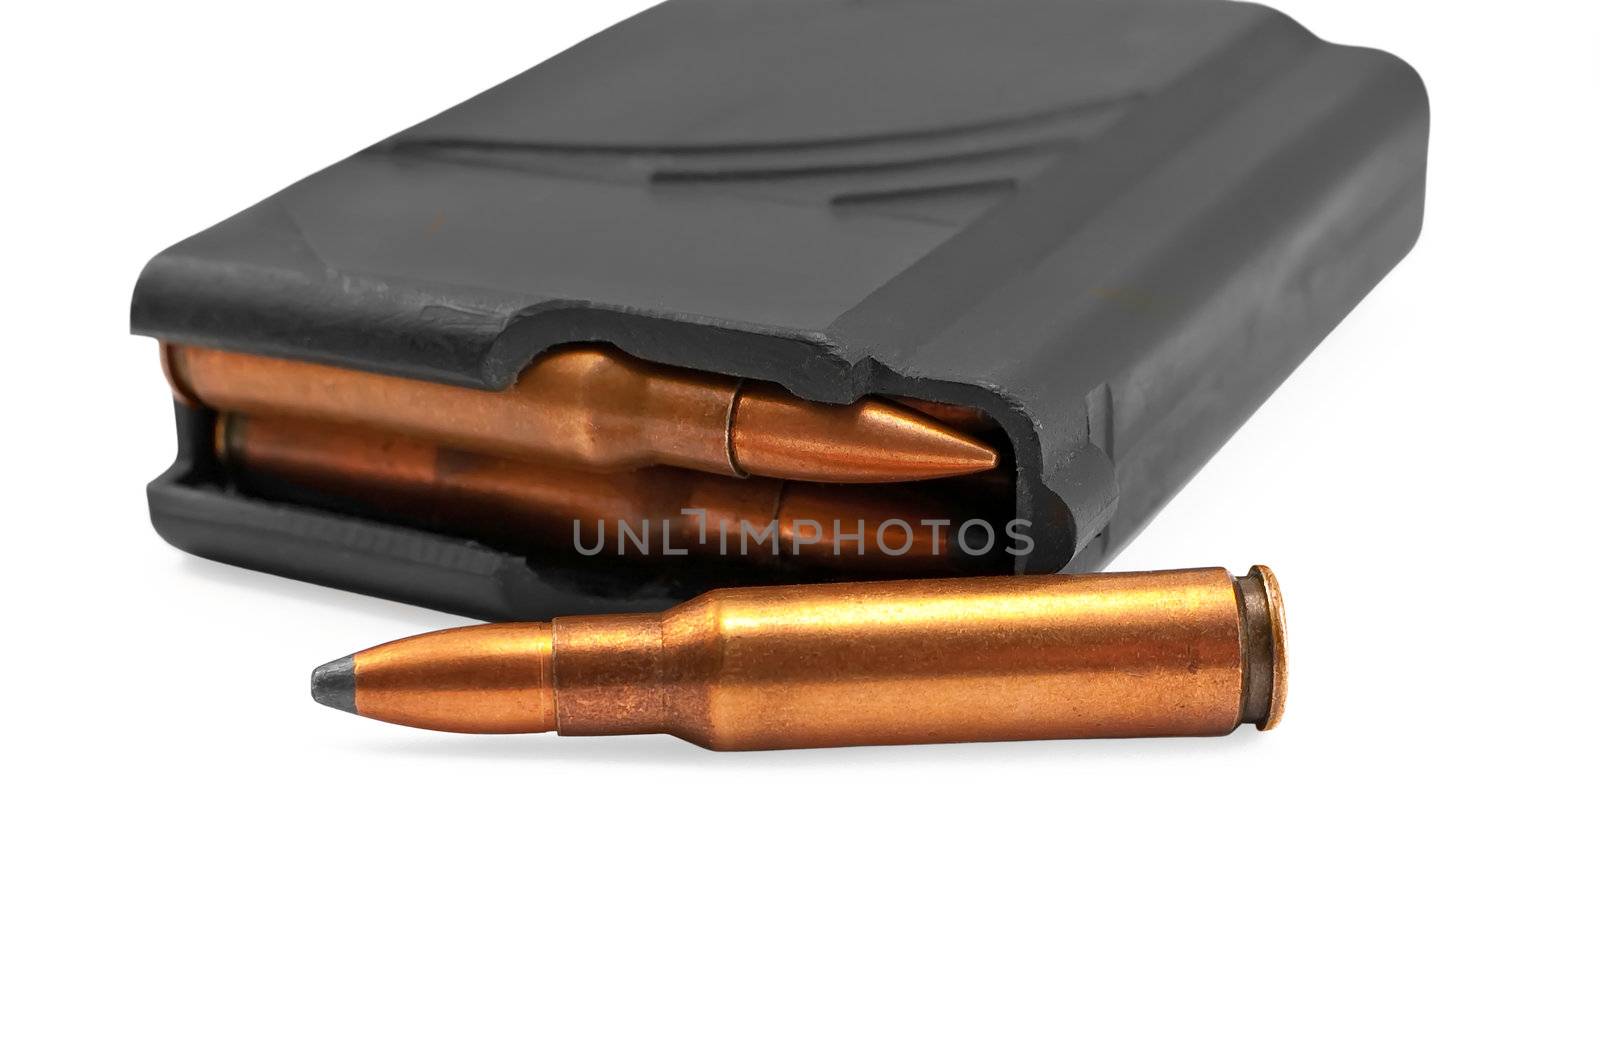 Ammunition for the automatic weapons with magazine by rezkrr